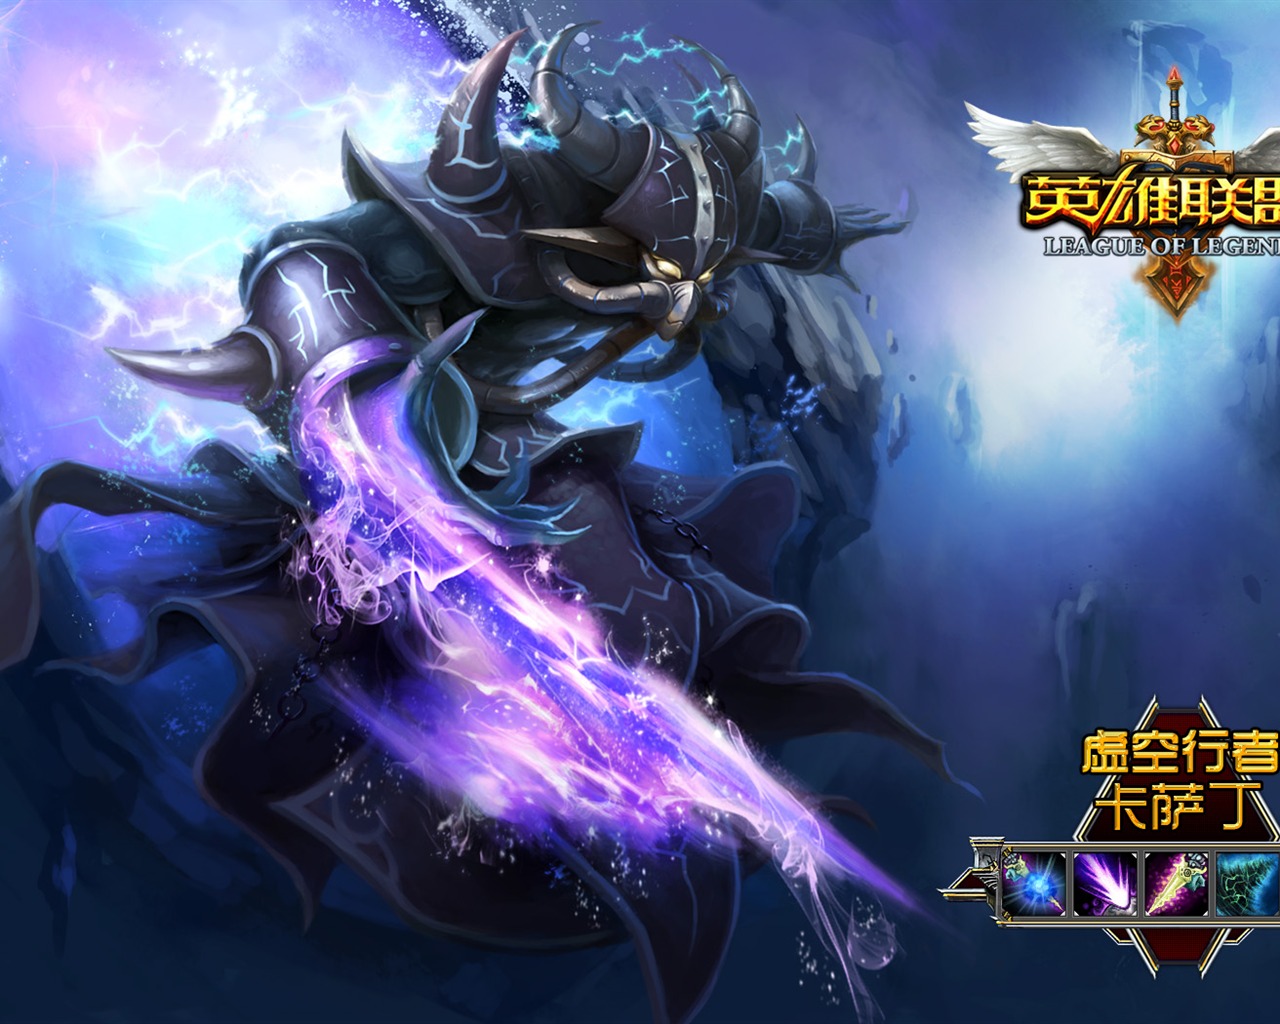 League of Legends Thema Tapete #6 - 1280x1024